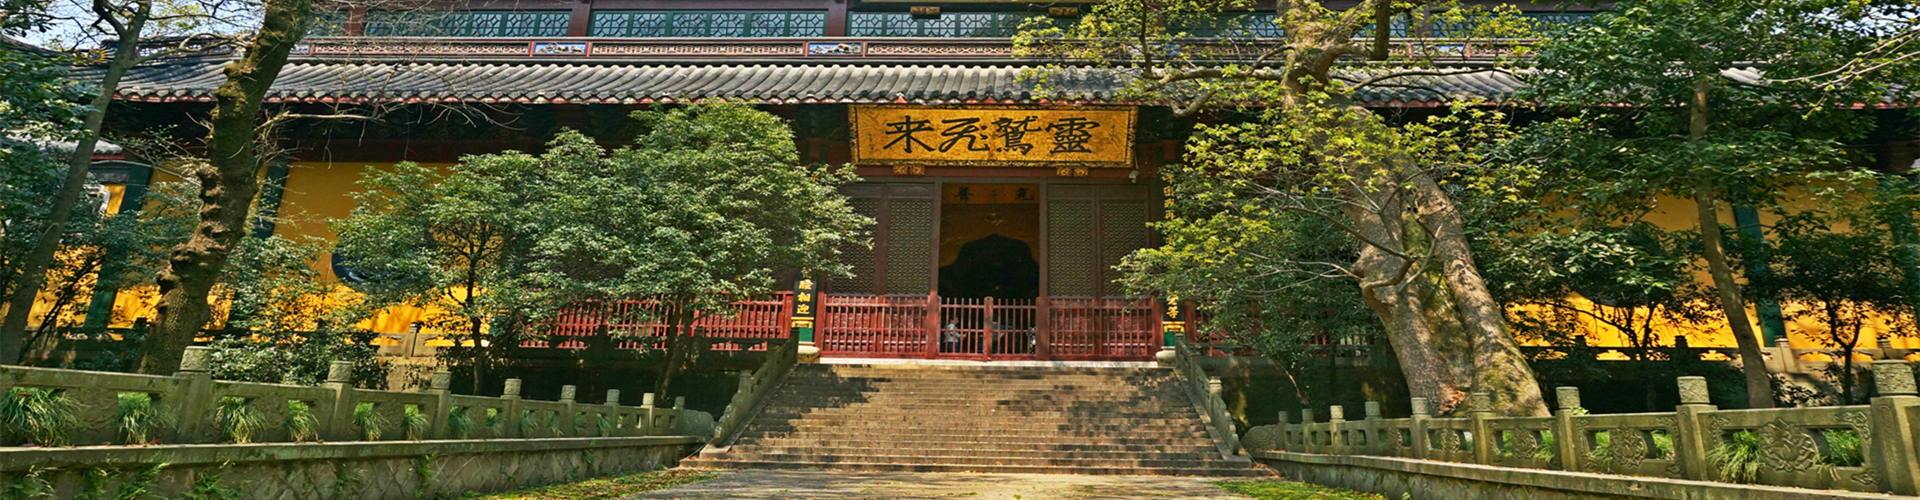 Lingyin Temple - the Most Famous Buddhist Temples in Hangzhou